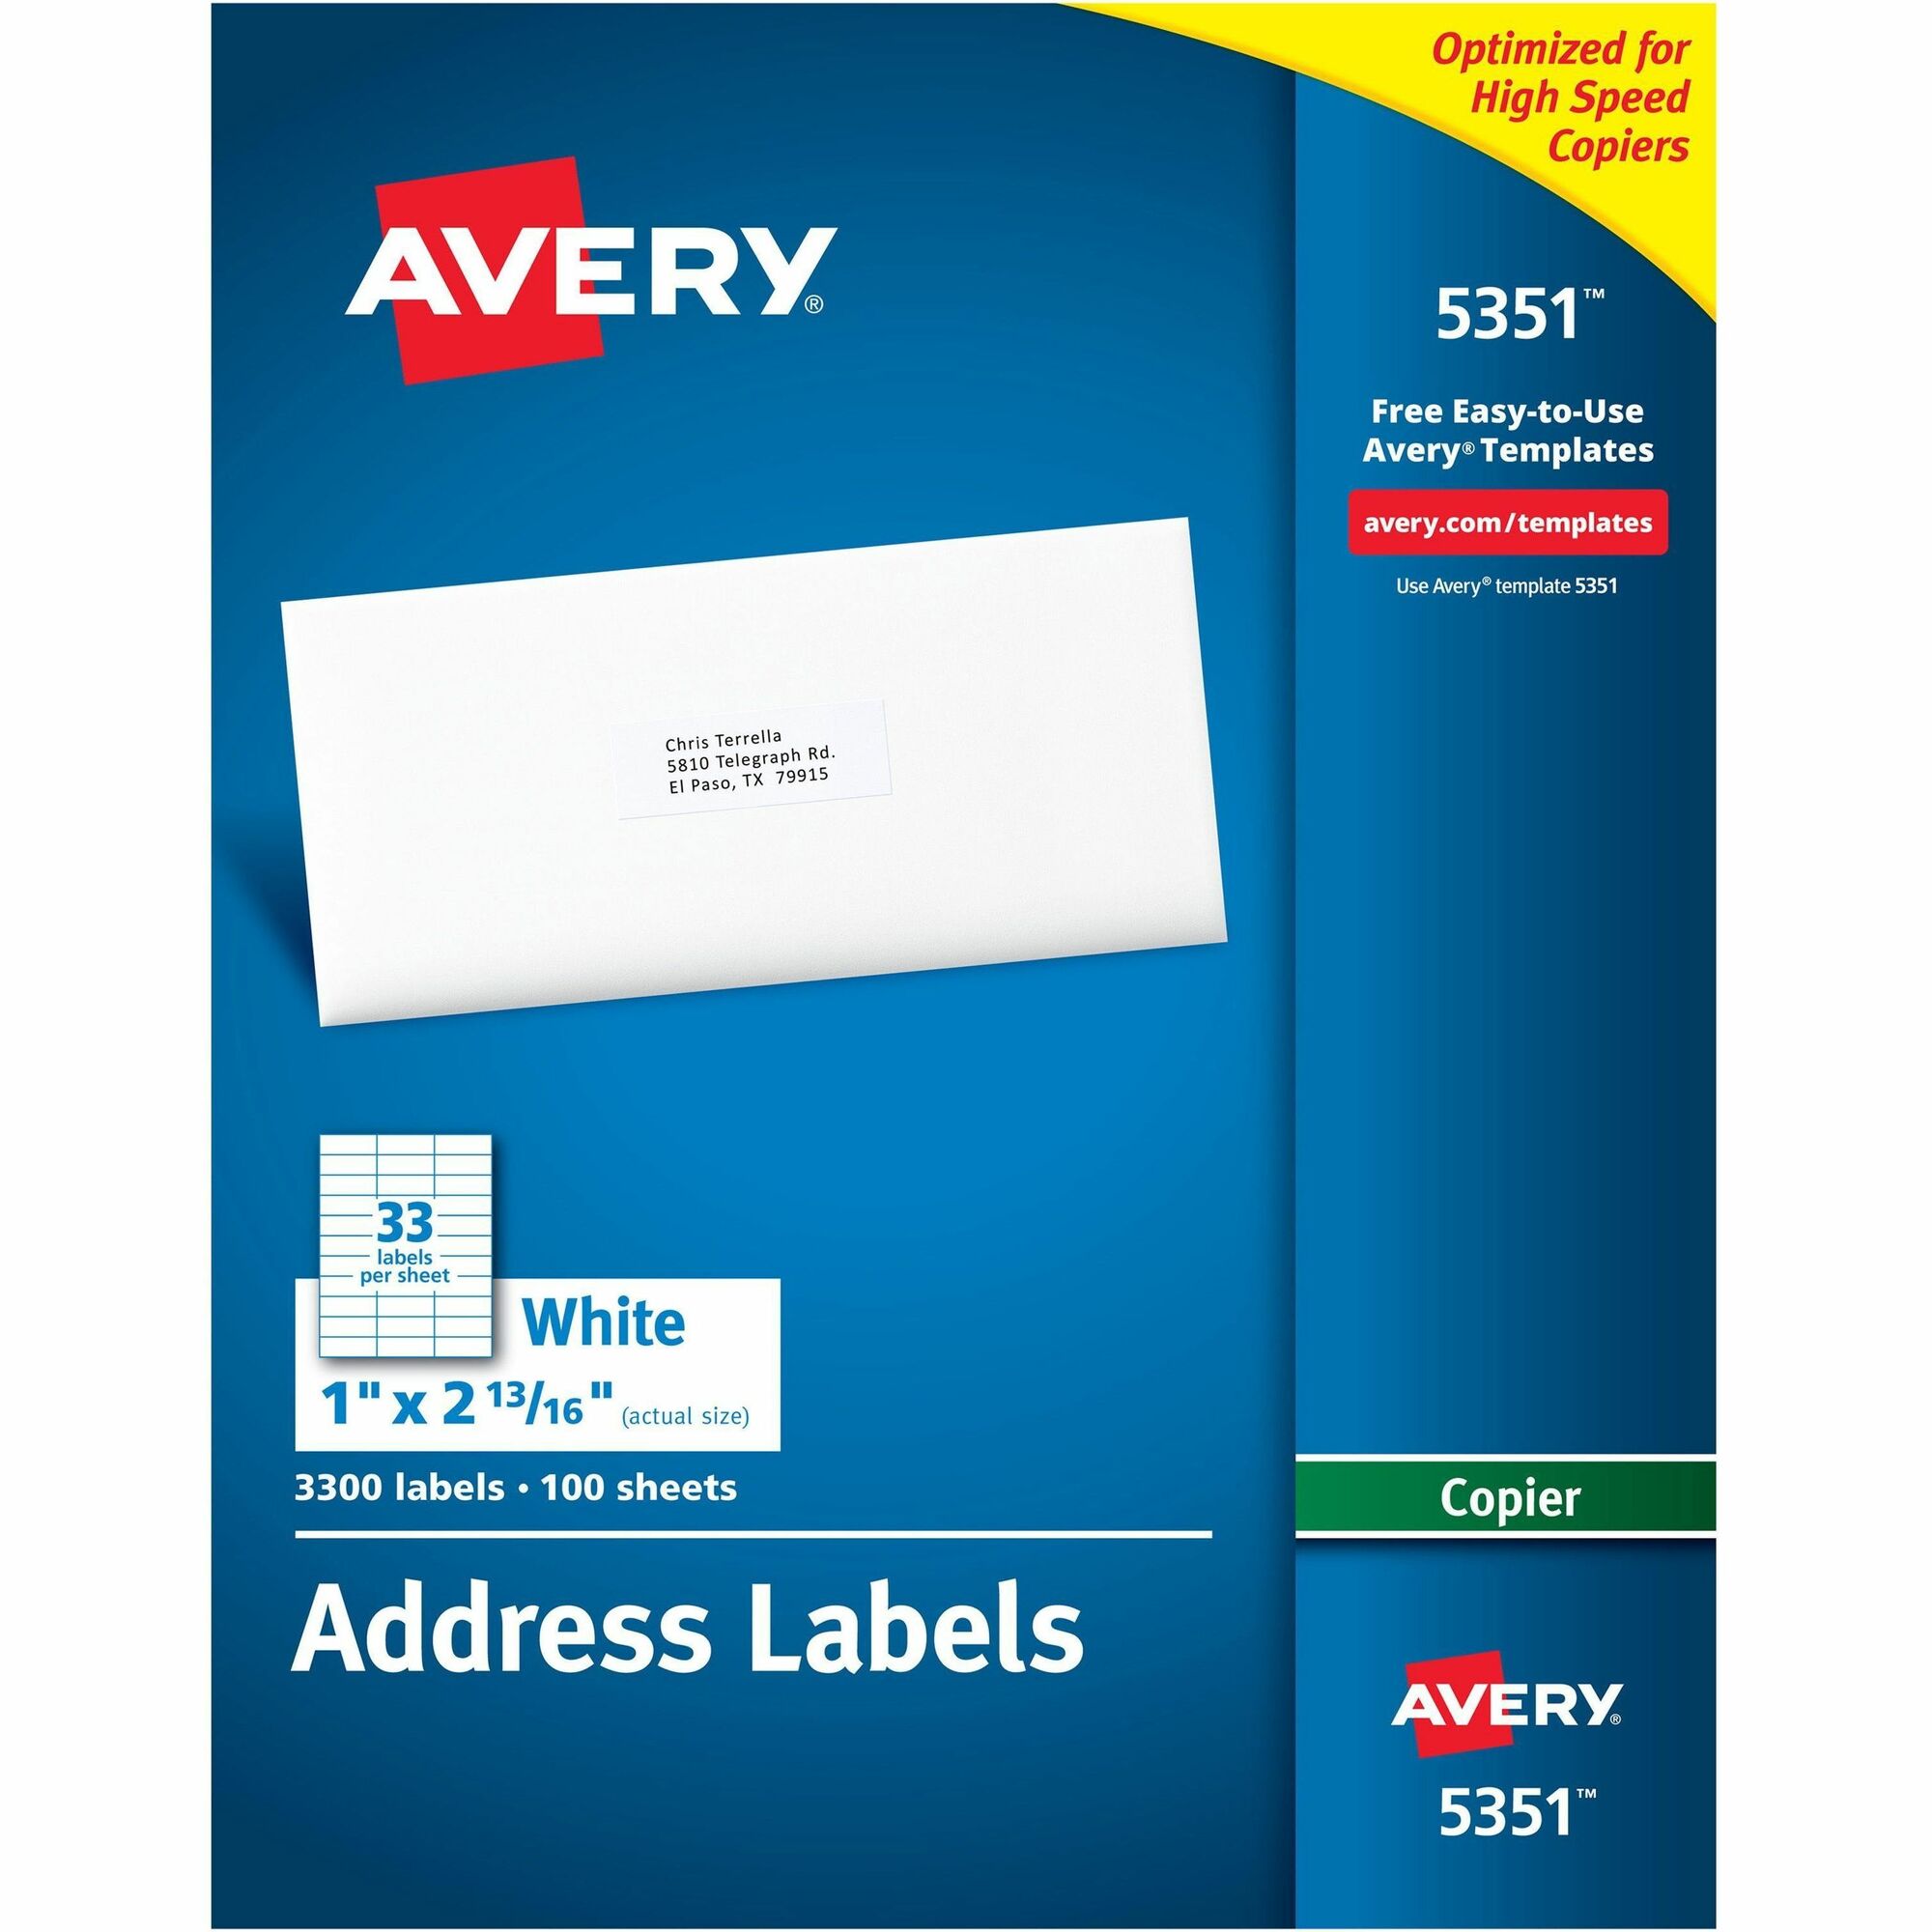 avery-address-labels-for-copiers-permanent-adhesive-1-x-2-13-16